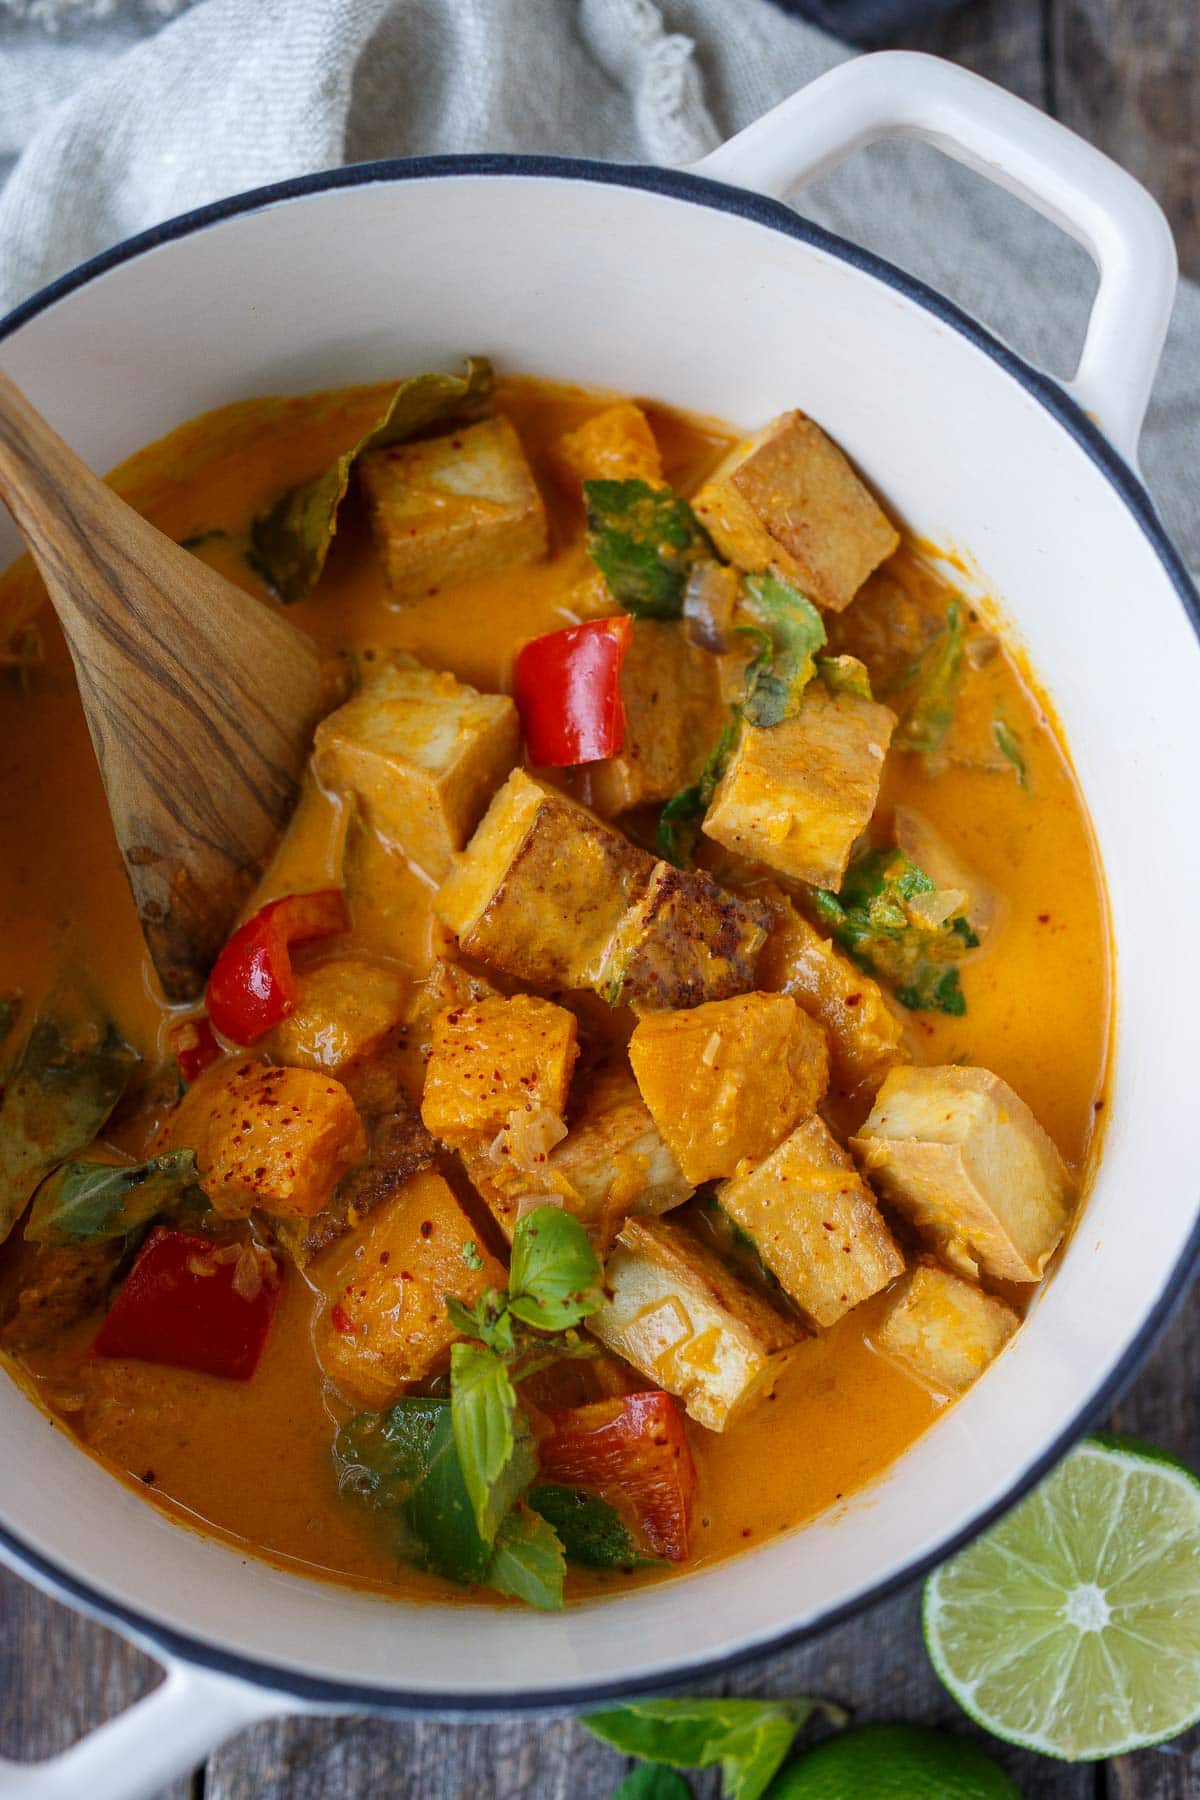 This creamy Pumpkin Curry recipe is full of delicious Thai flavors, made with fresh pumpkin and your choice of tofu, chicken or shrimp. Gluten-free, dairy-free, and great for meal prep!